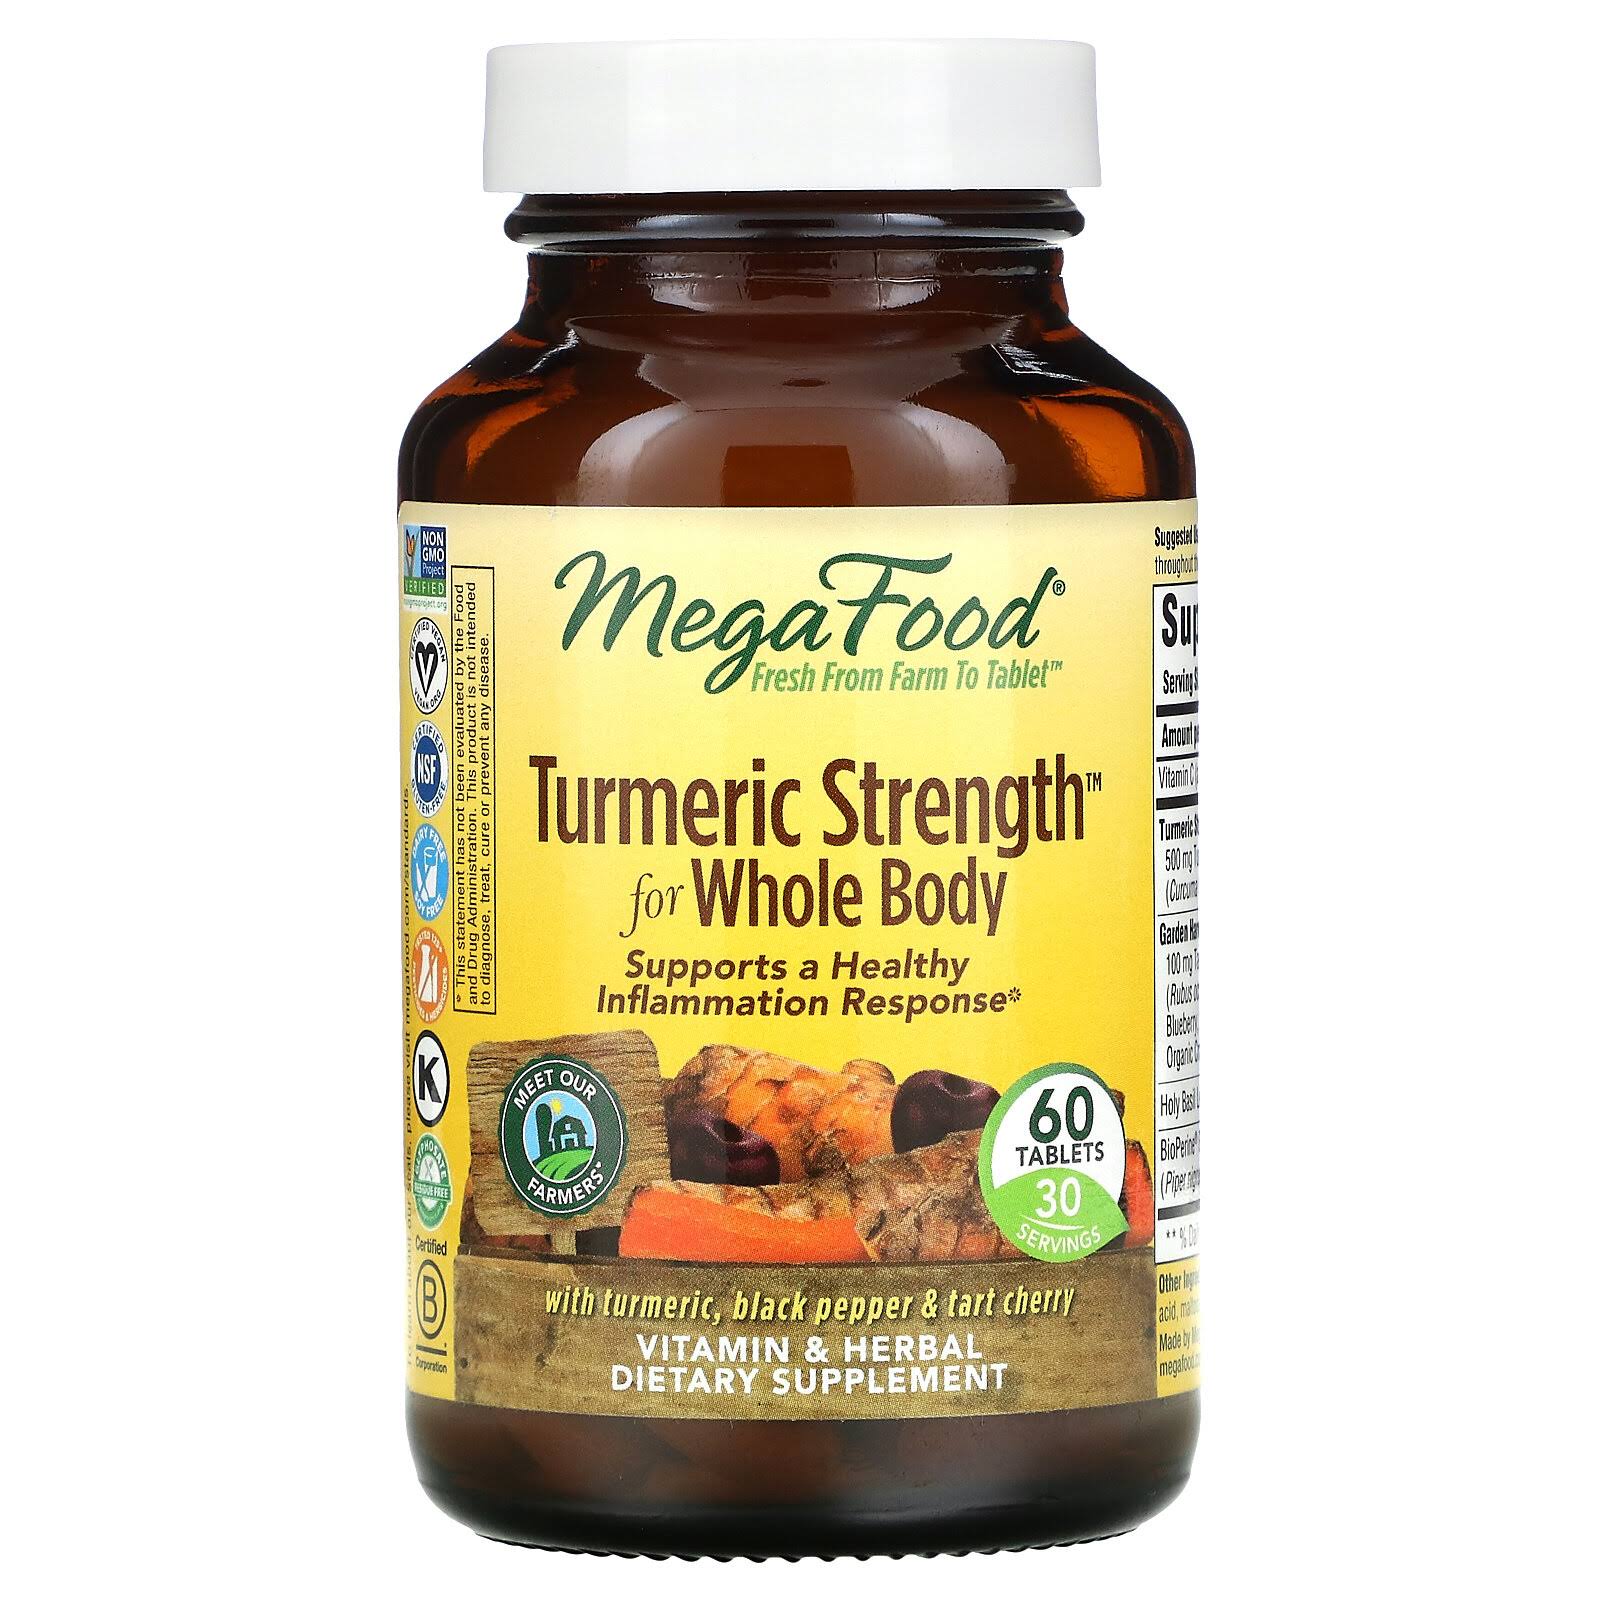 MegaFood Turmeric Strength for Whole Body Dietary Supplement - 60 Tablets